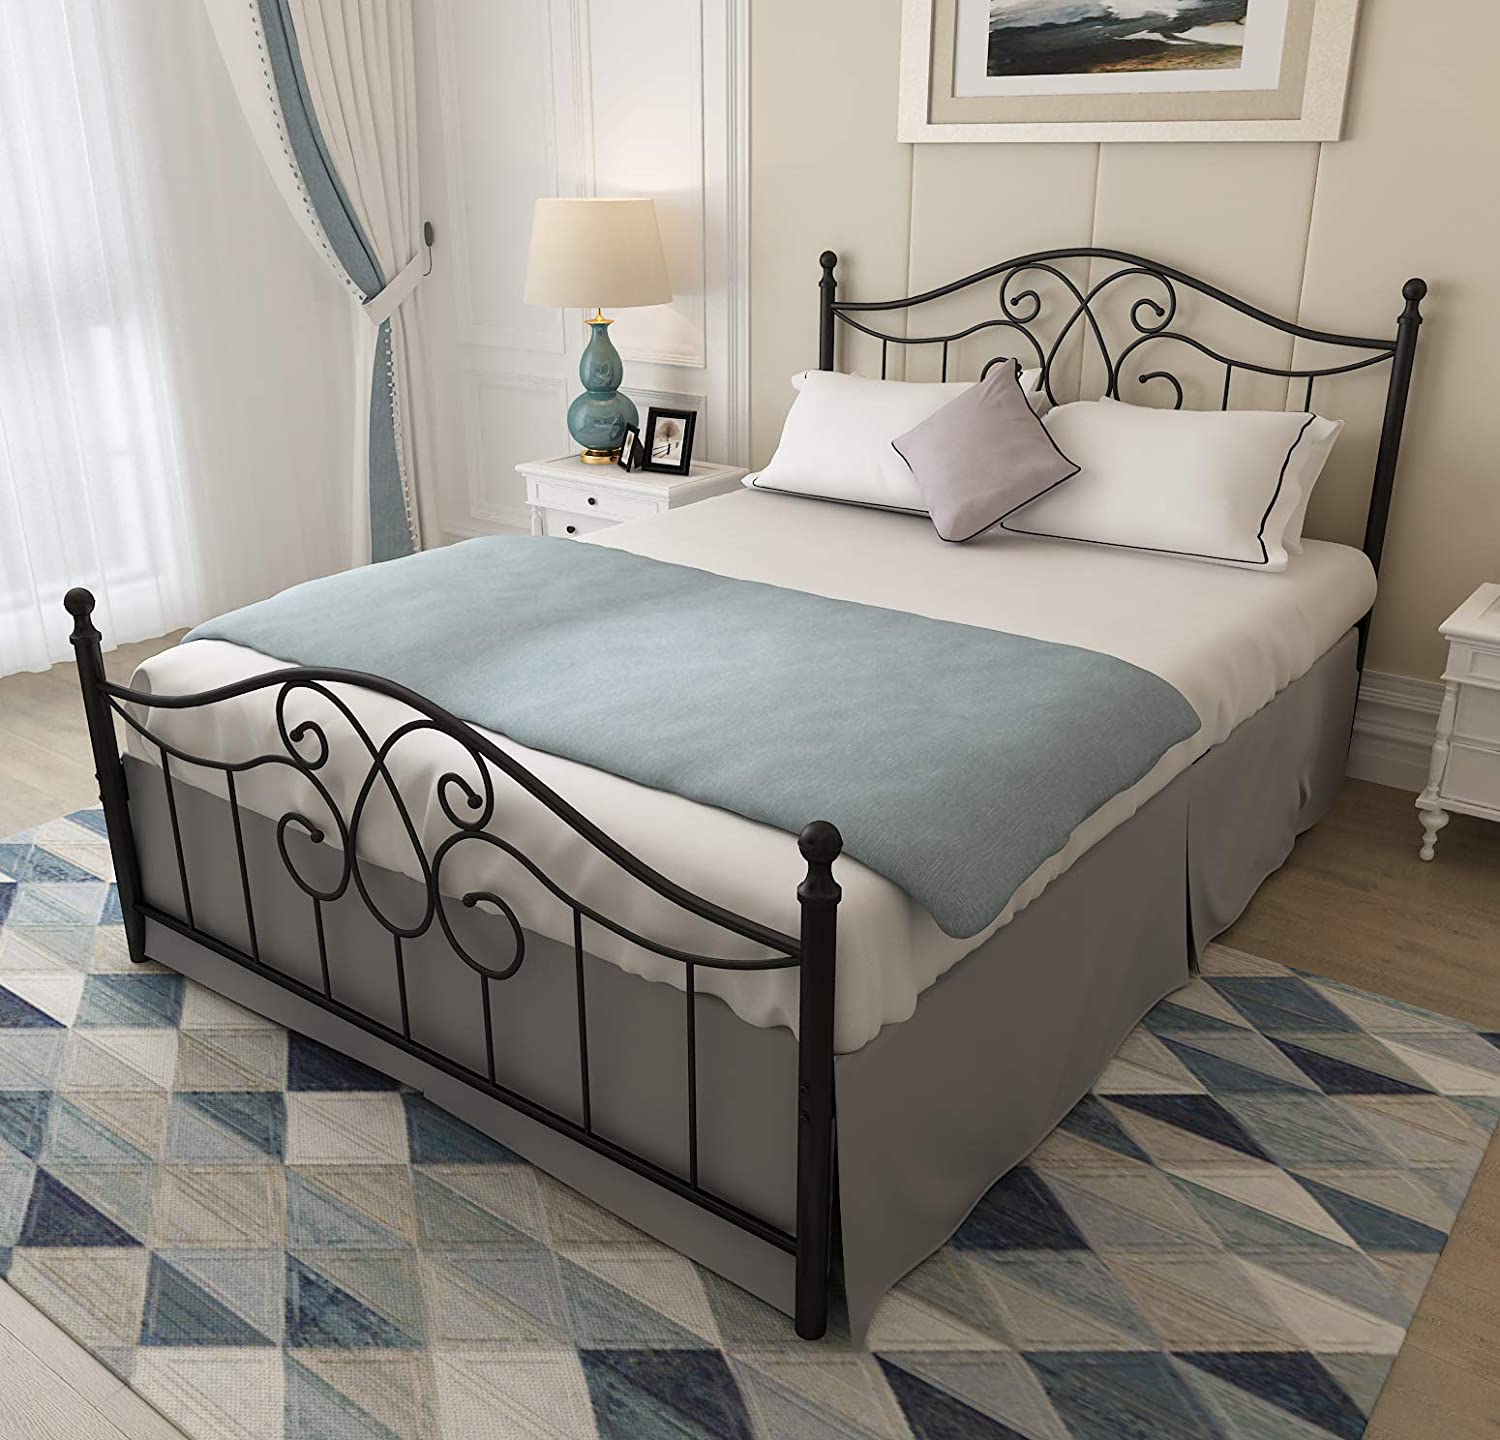  B2C Furniture queen size bed frame